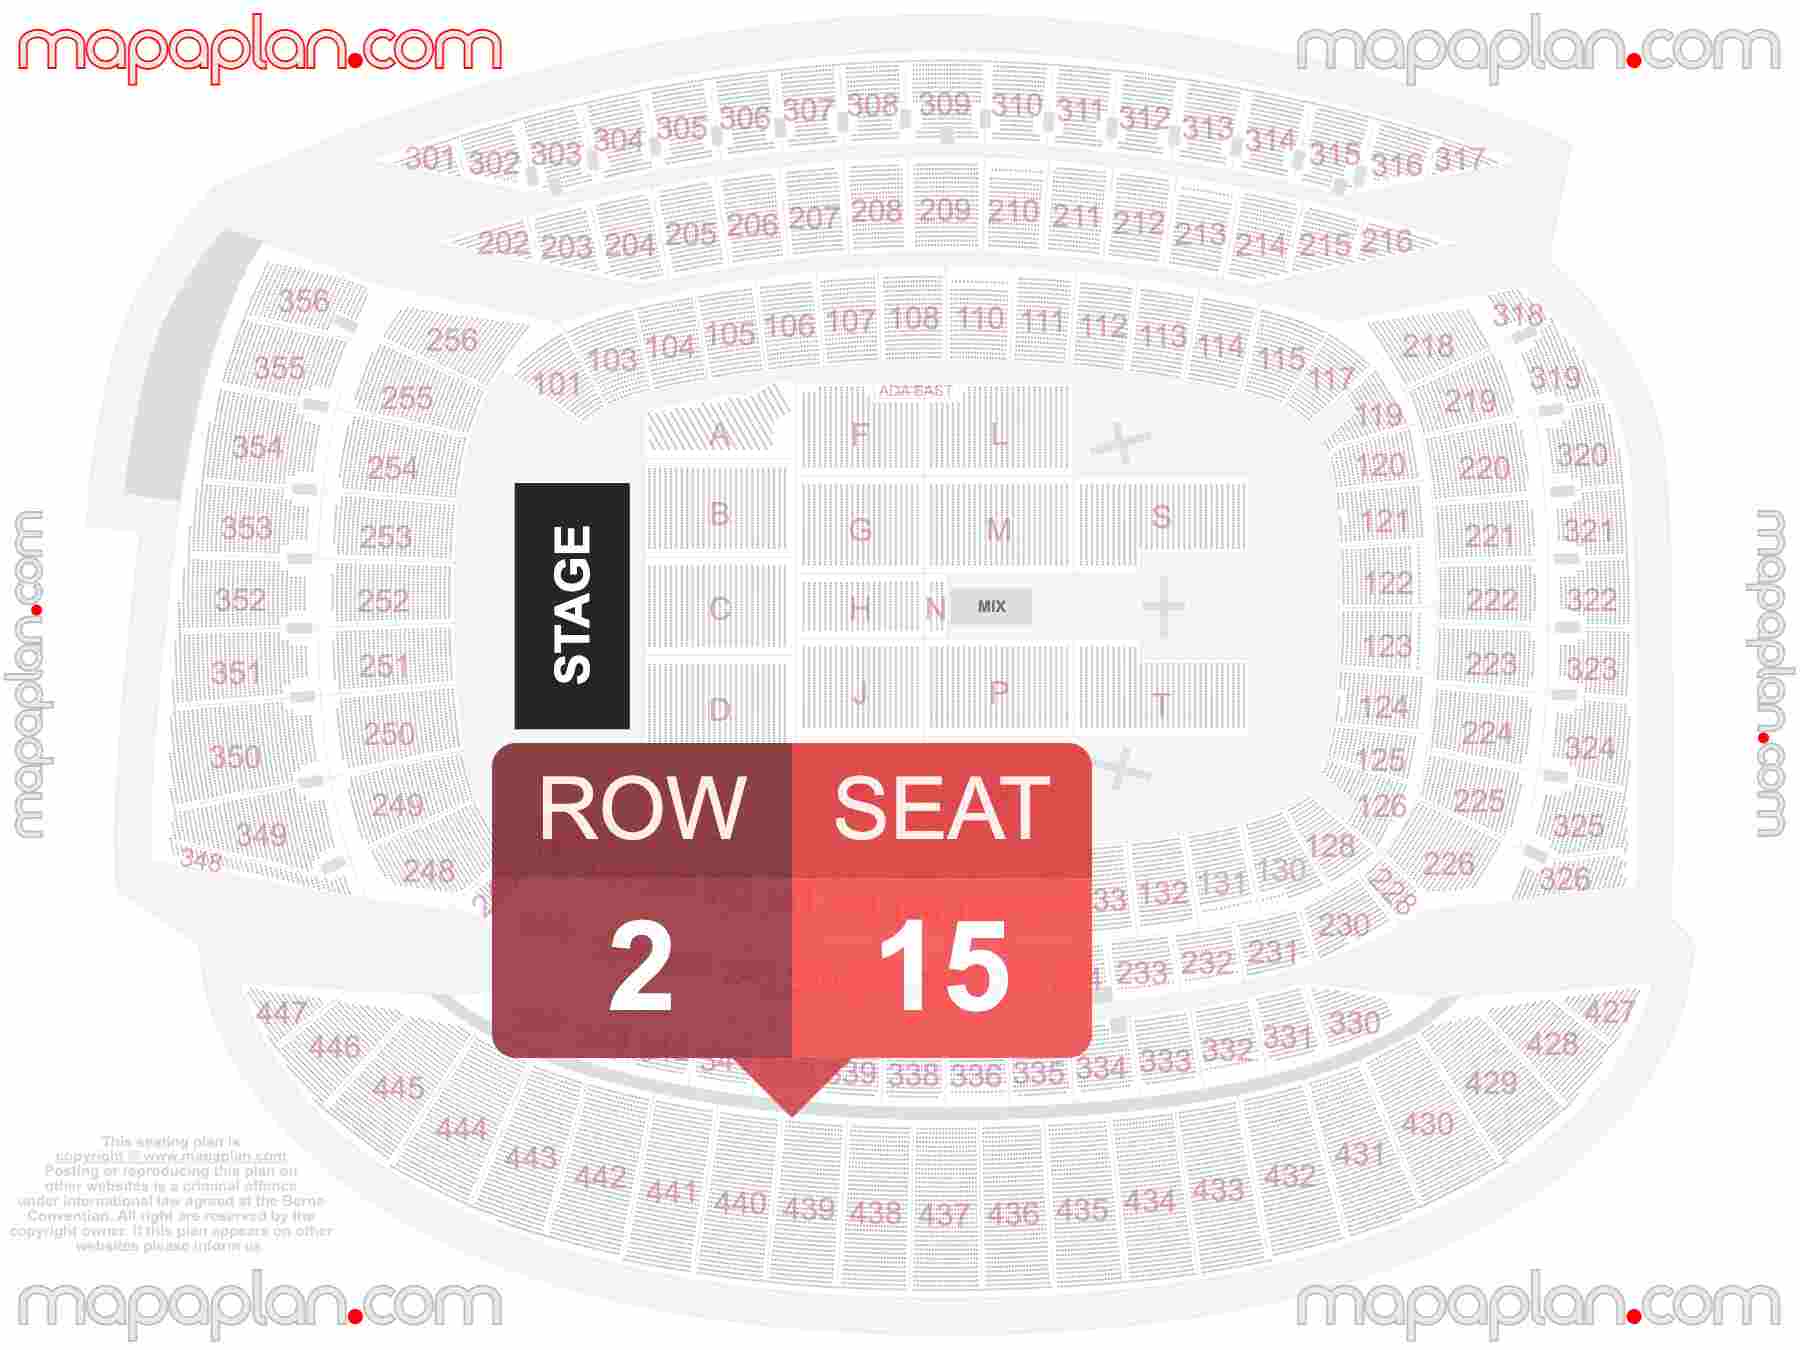 Chicago Soldier Field seating chart Concert detailed seat numbers and row numbering chart with interactive map plan layout